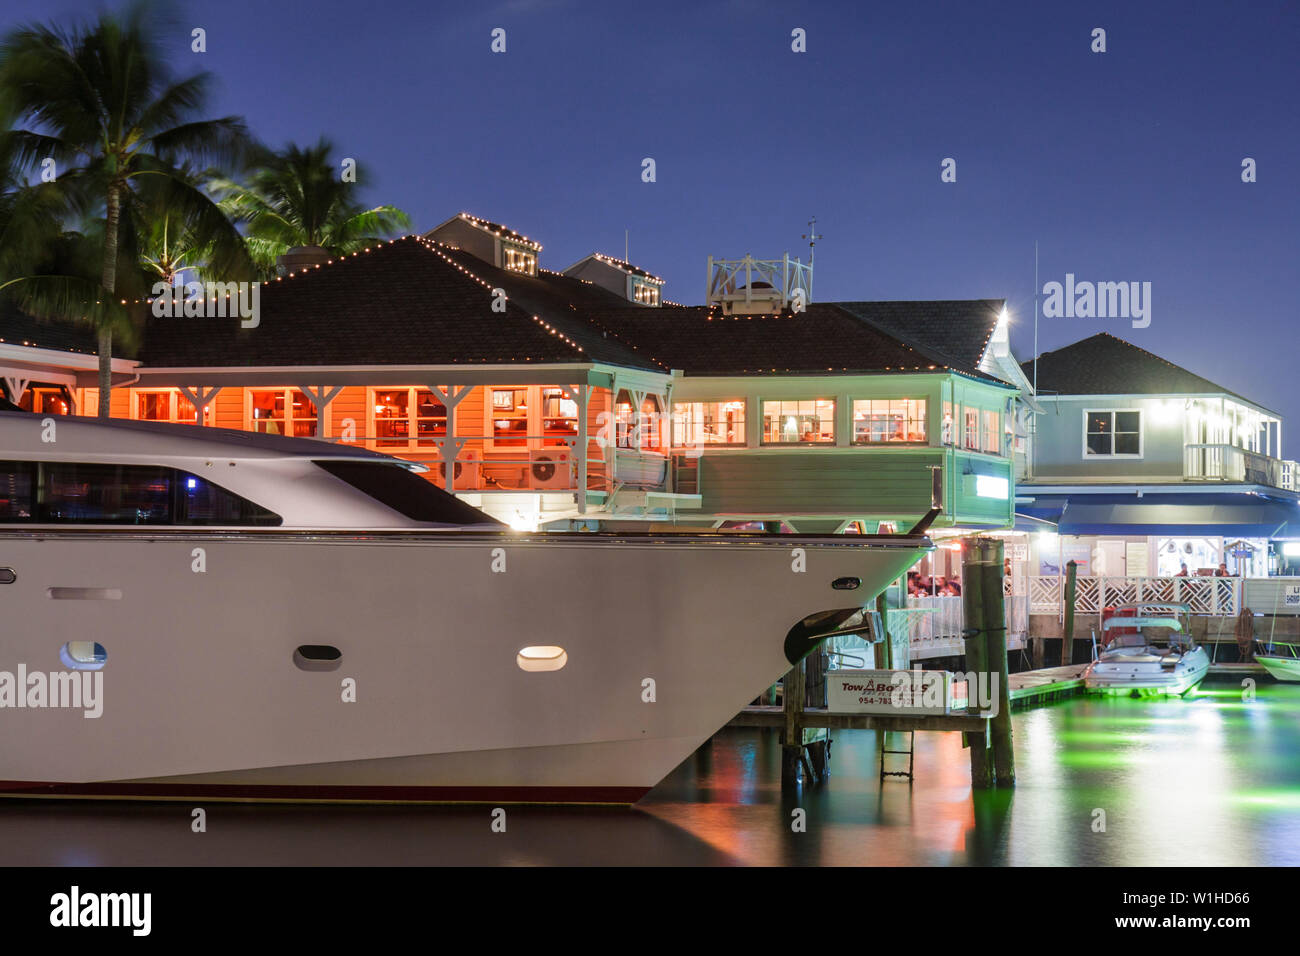 Fort ft. Lauderdale Florida,15th Street Fisheries,restaurant restaurants restaurants repas café cafés, service, cuisine, Intracoastal Stranahan River, marina, wa Banque D'Images